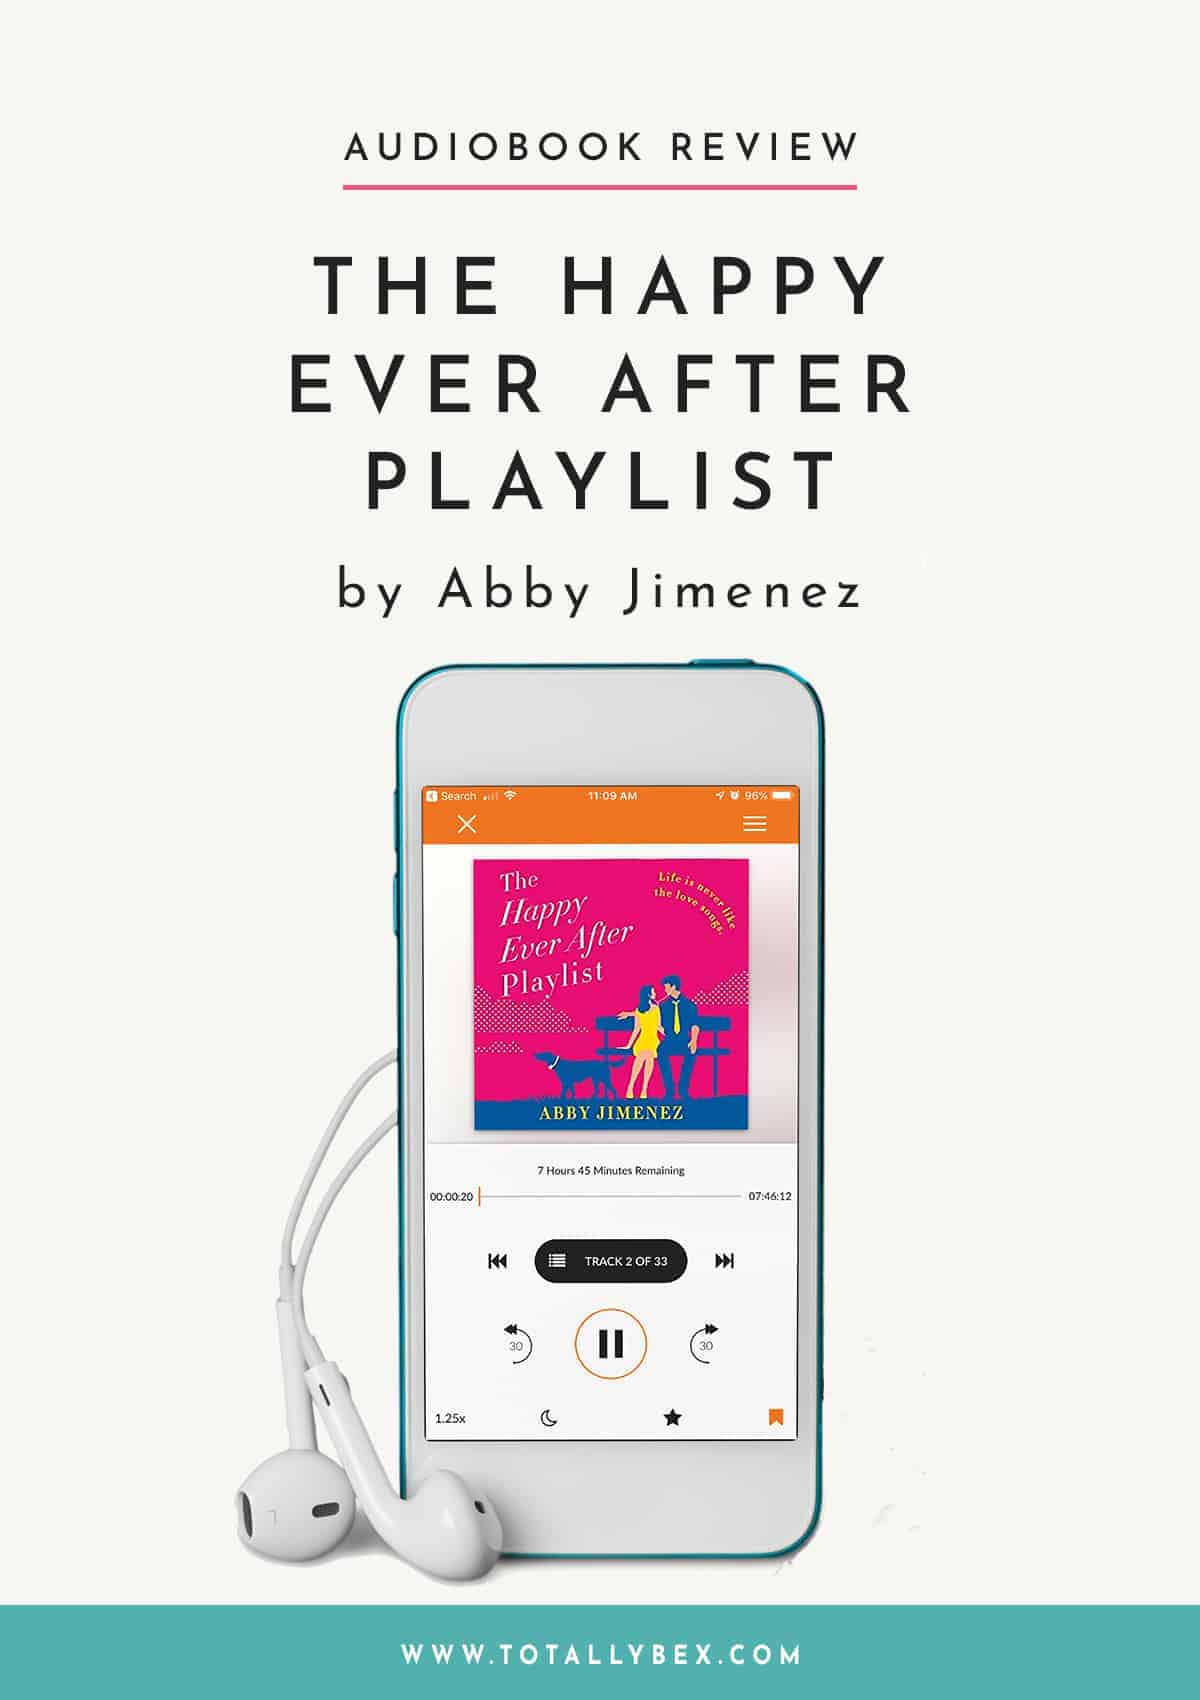 The Happy Ever After Playlist by Abby Jimenez – Audiobook Review